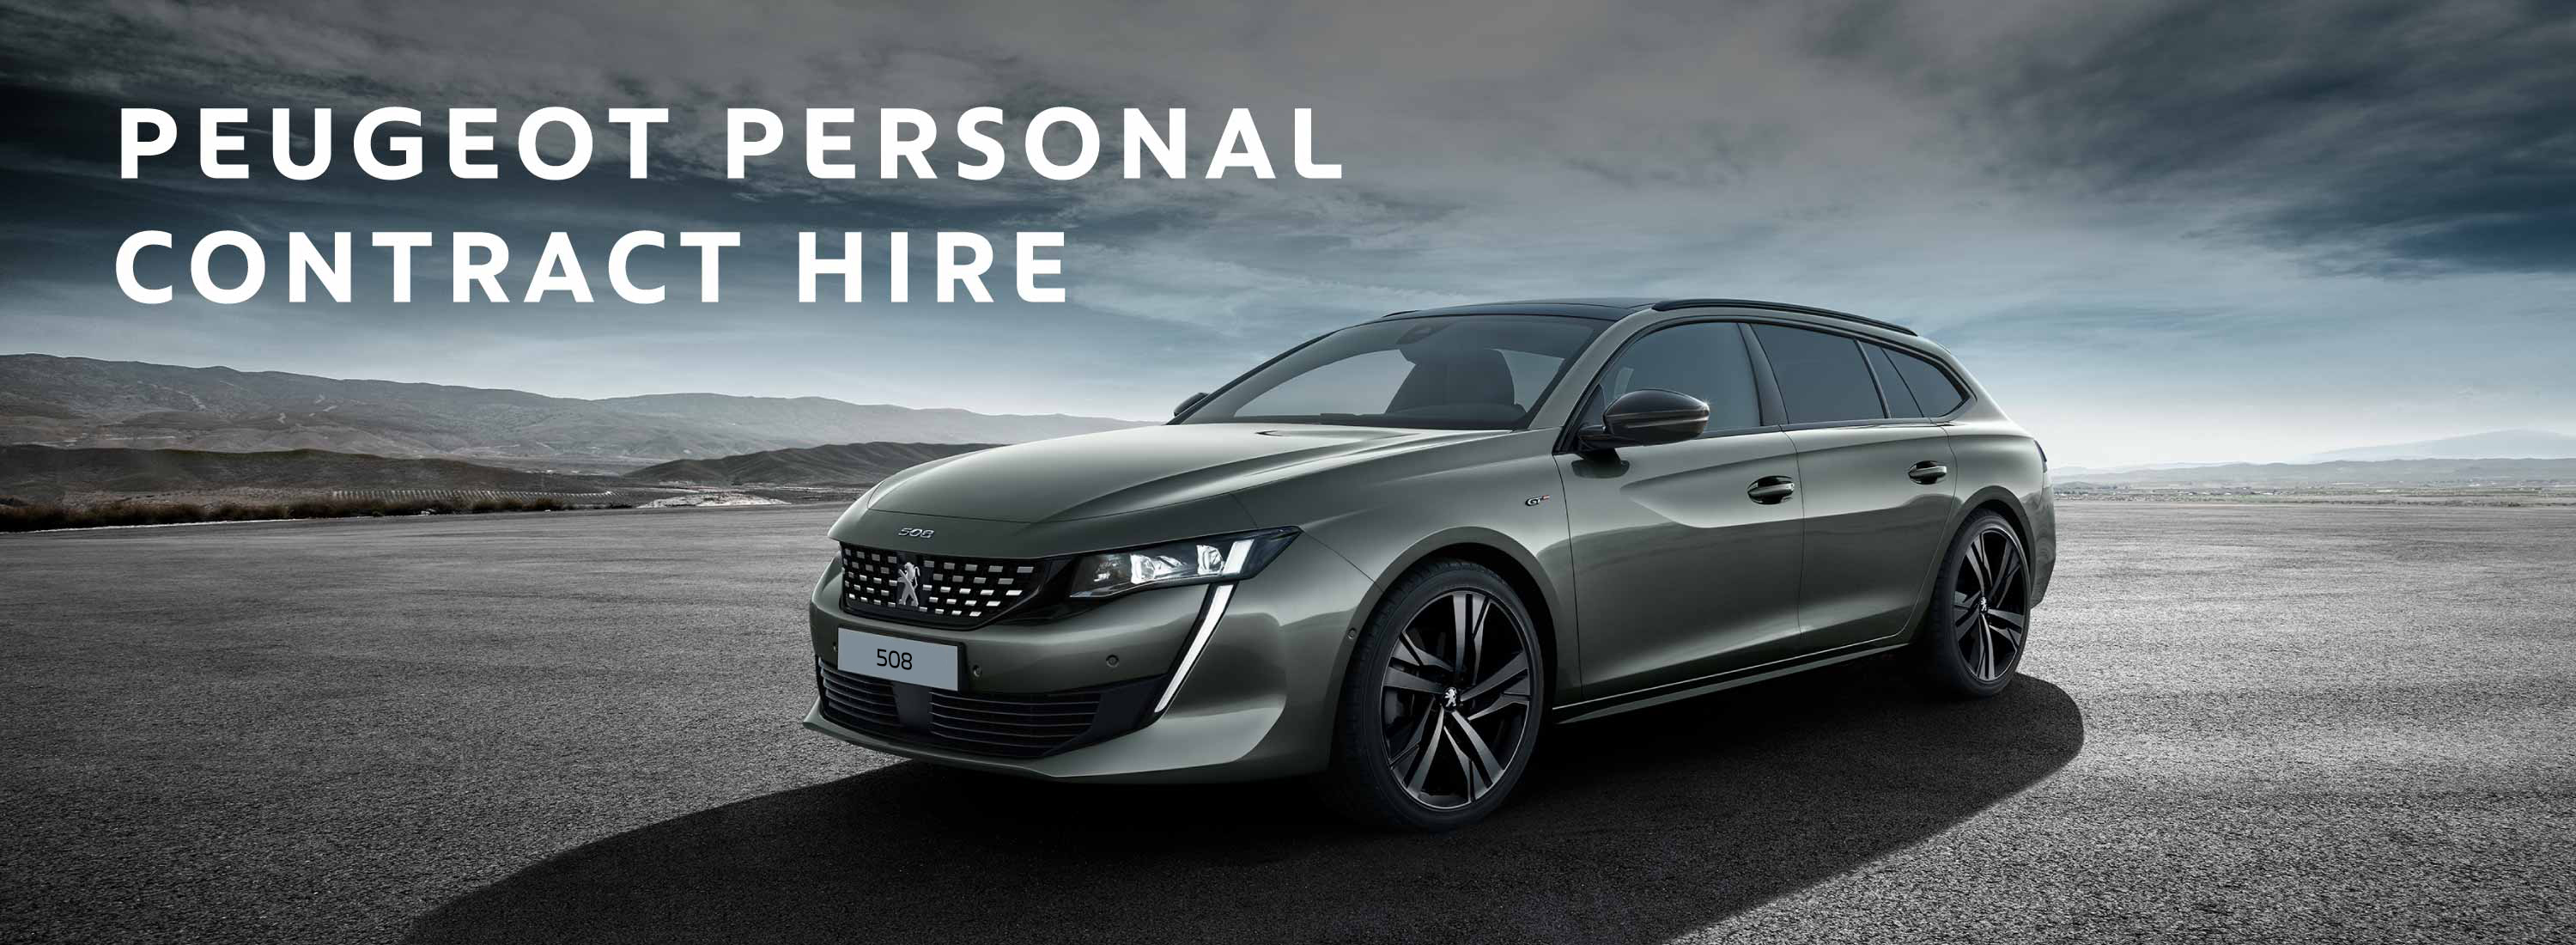 Peugeot Personal Contract Hire